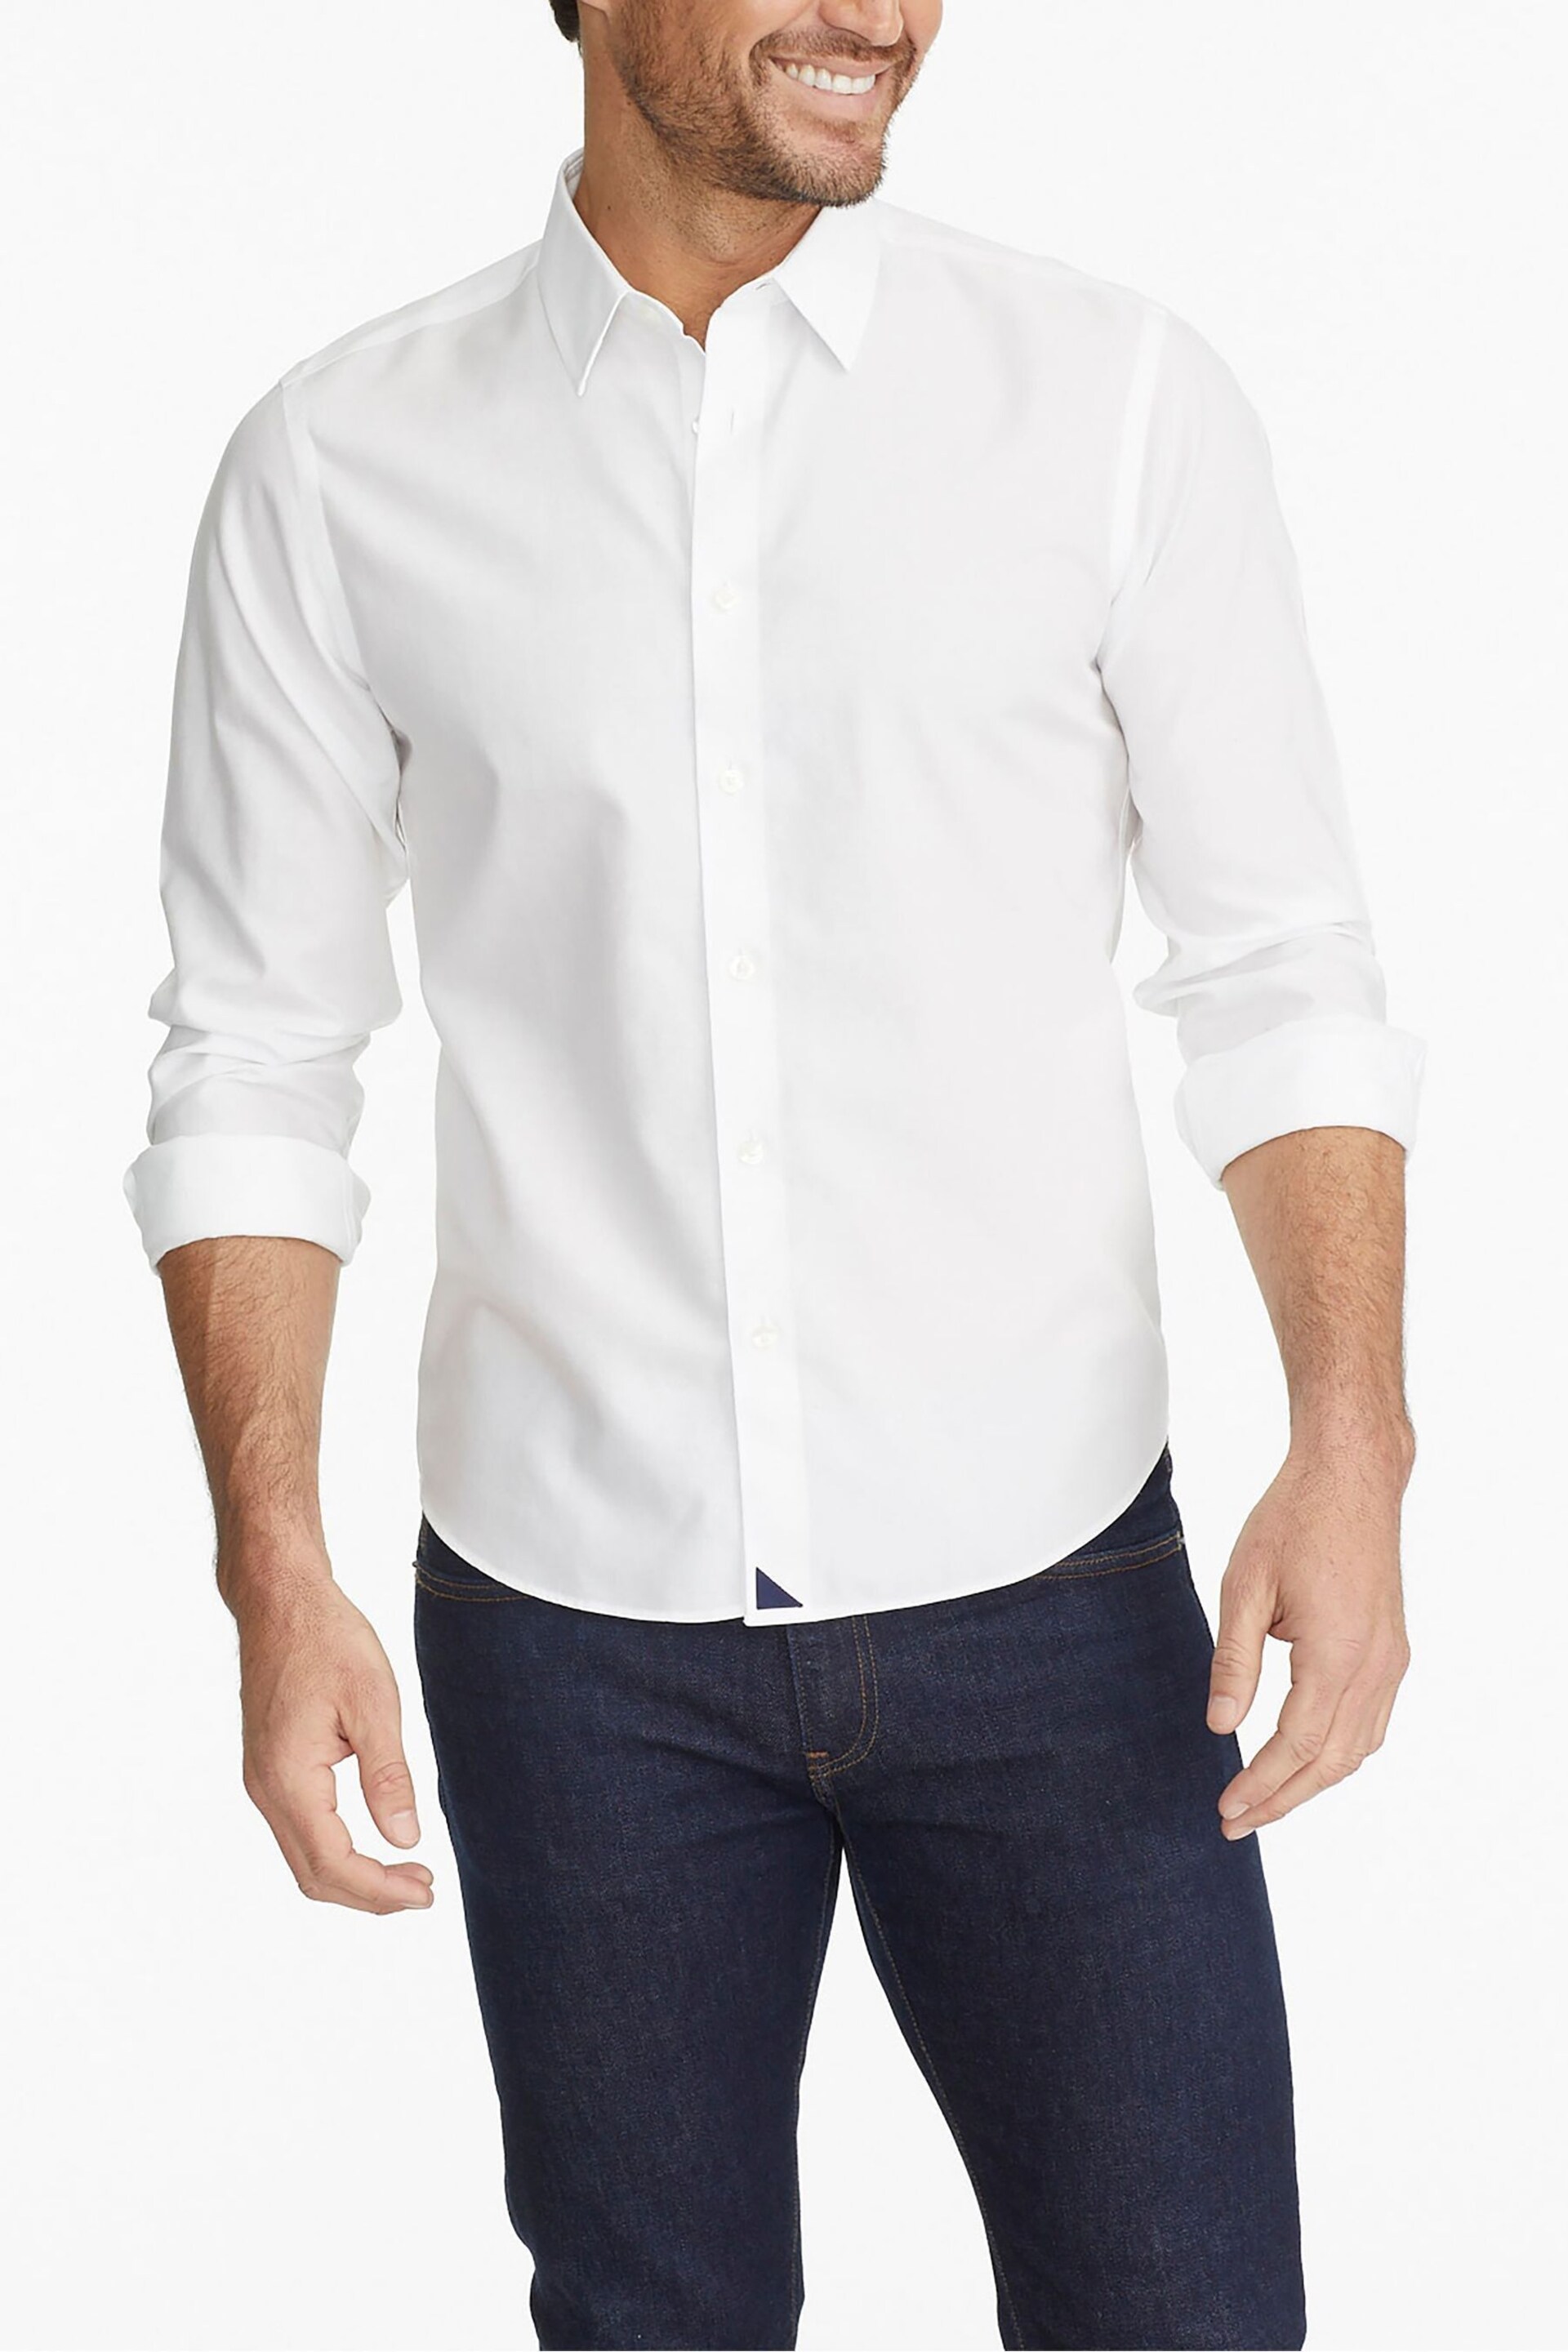 UNTUCKit White Off Wrinkle-Free Relaxed Fit Las Cases Shirt - Image 1 of 3